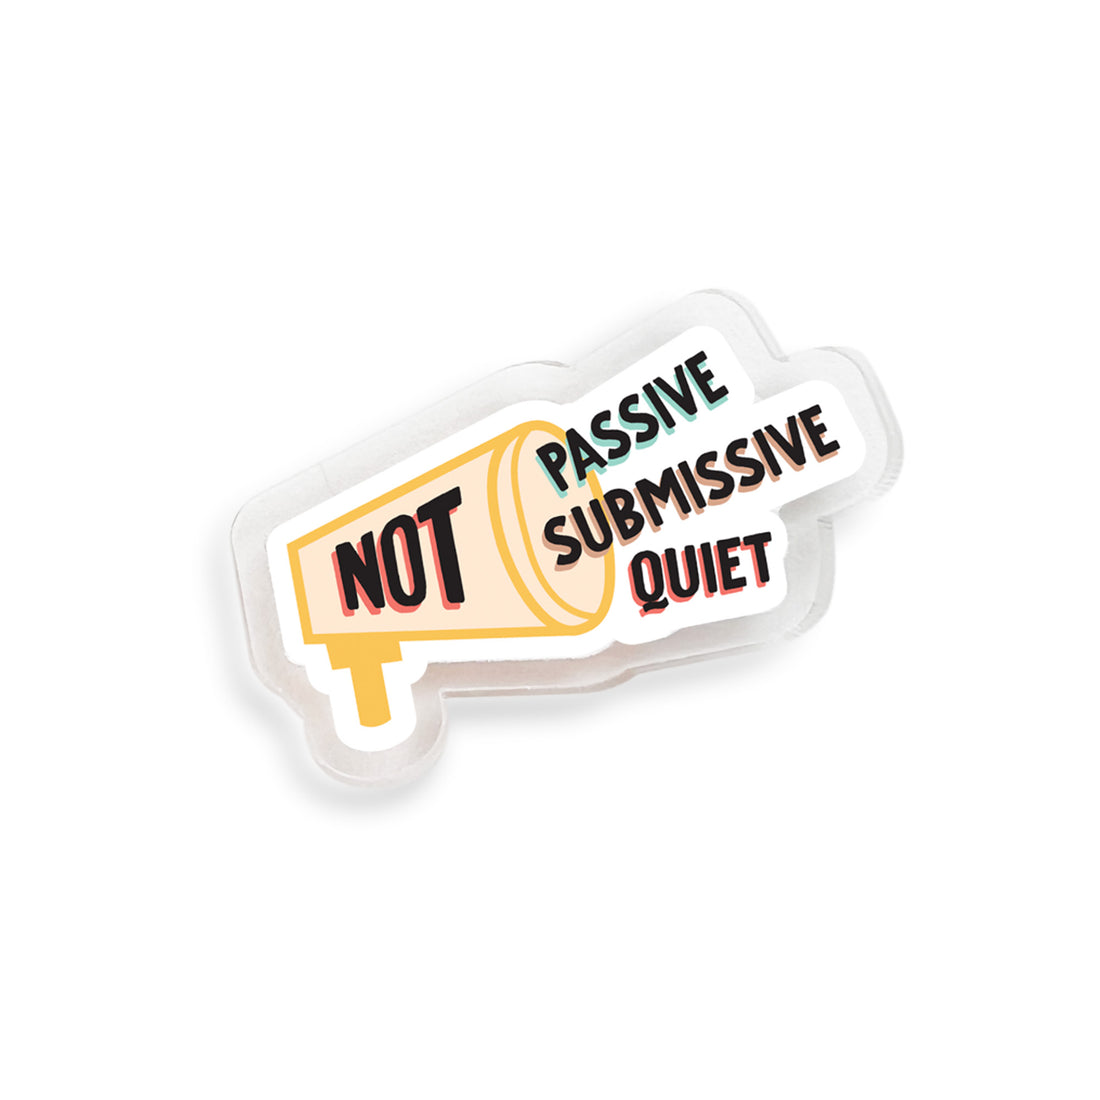 Not passive, submissive, quiet acrylic pin by I&